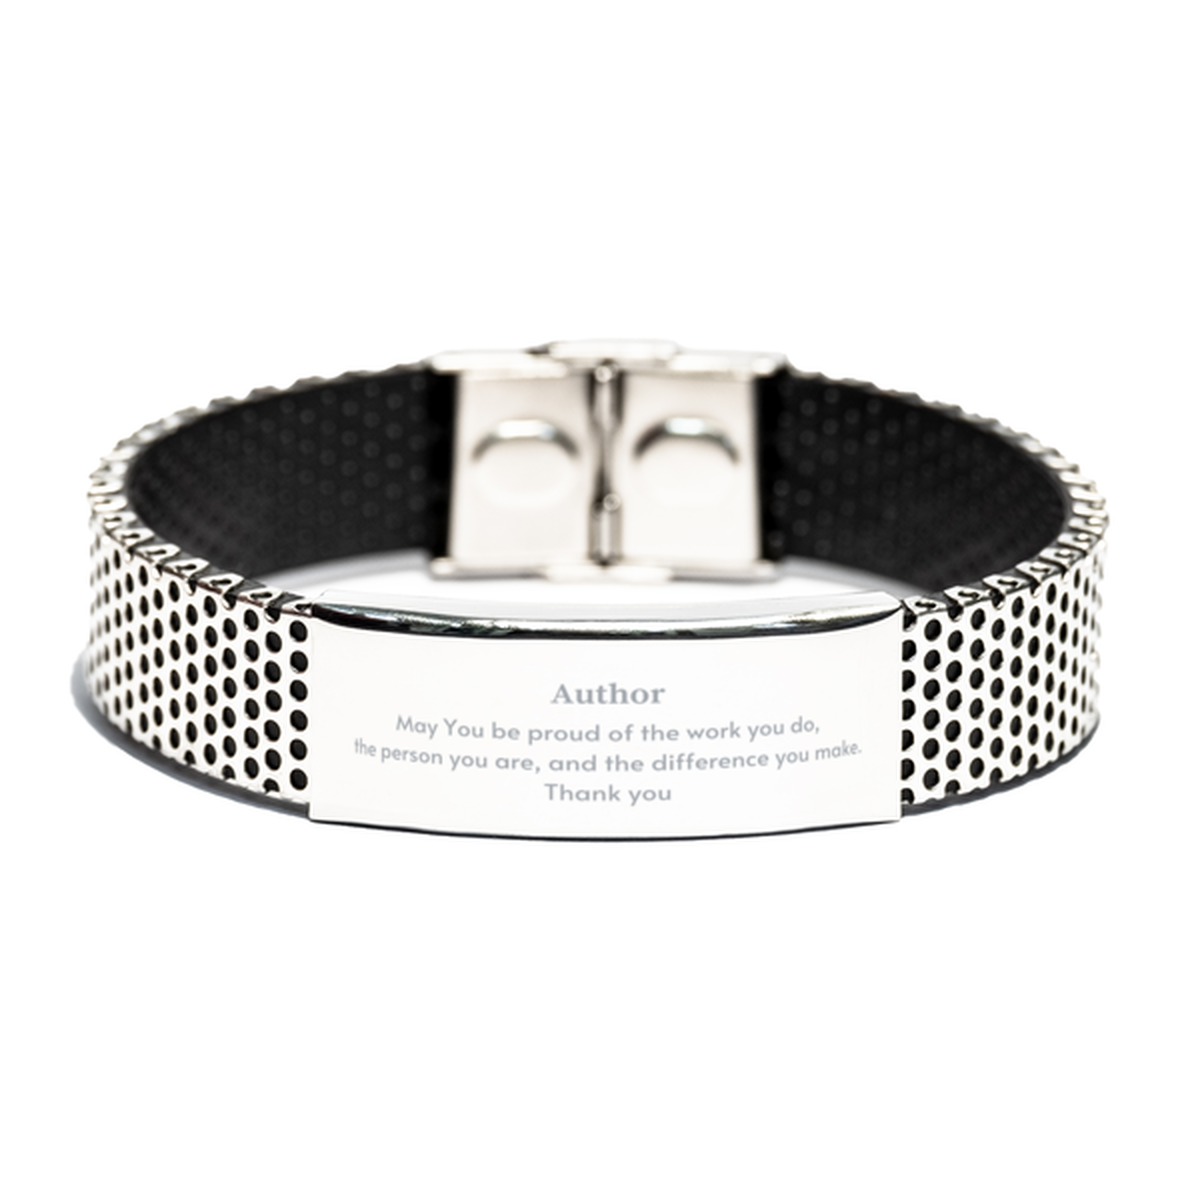 Heartwarming Stainless Steel Bracelet Retirement Coworkers Gifts for Author, Author May You be proud of the work you do, the person you are Gifts for Boss Men Women Friends